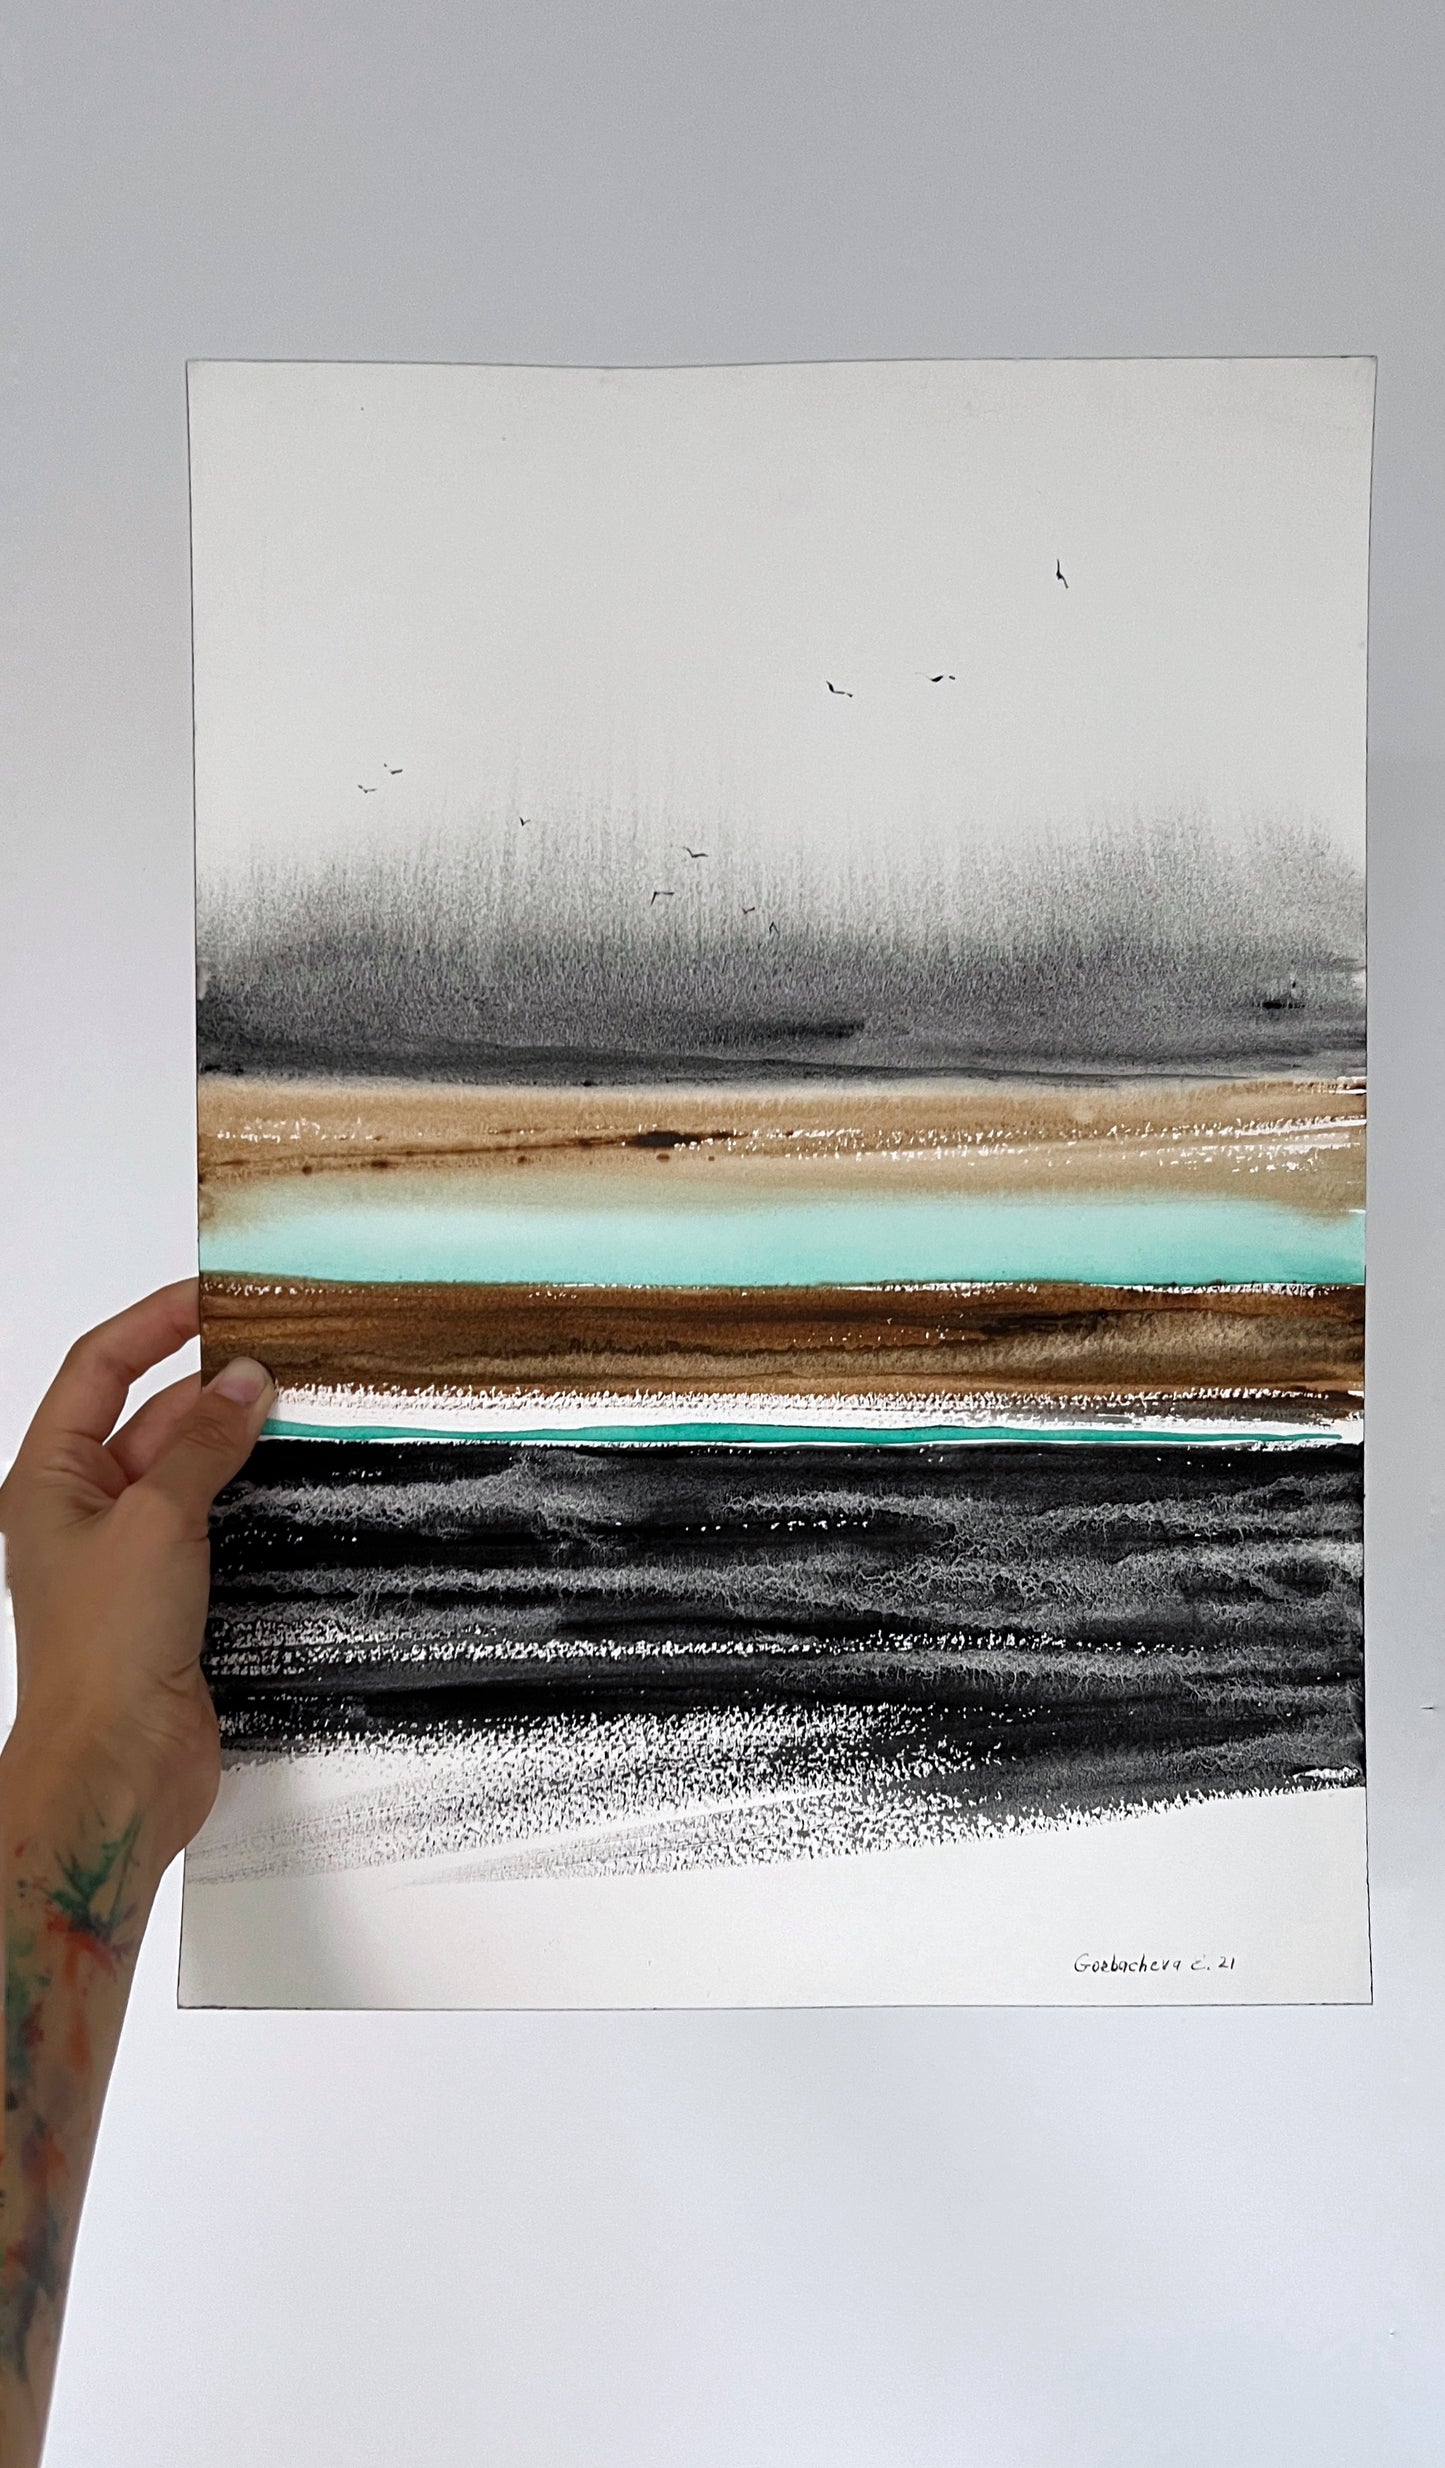 River Valley Abstract Painting - Watercolor in Gray, Burnt Orange, Turquoise Tones